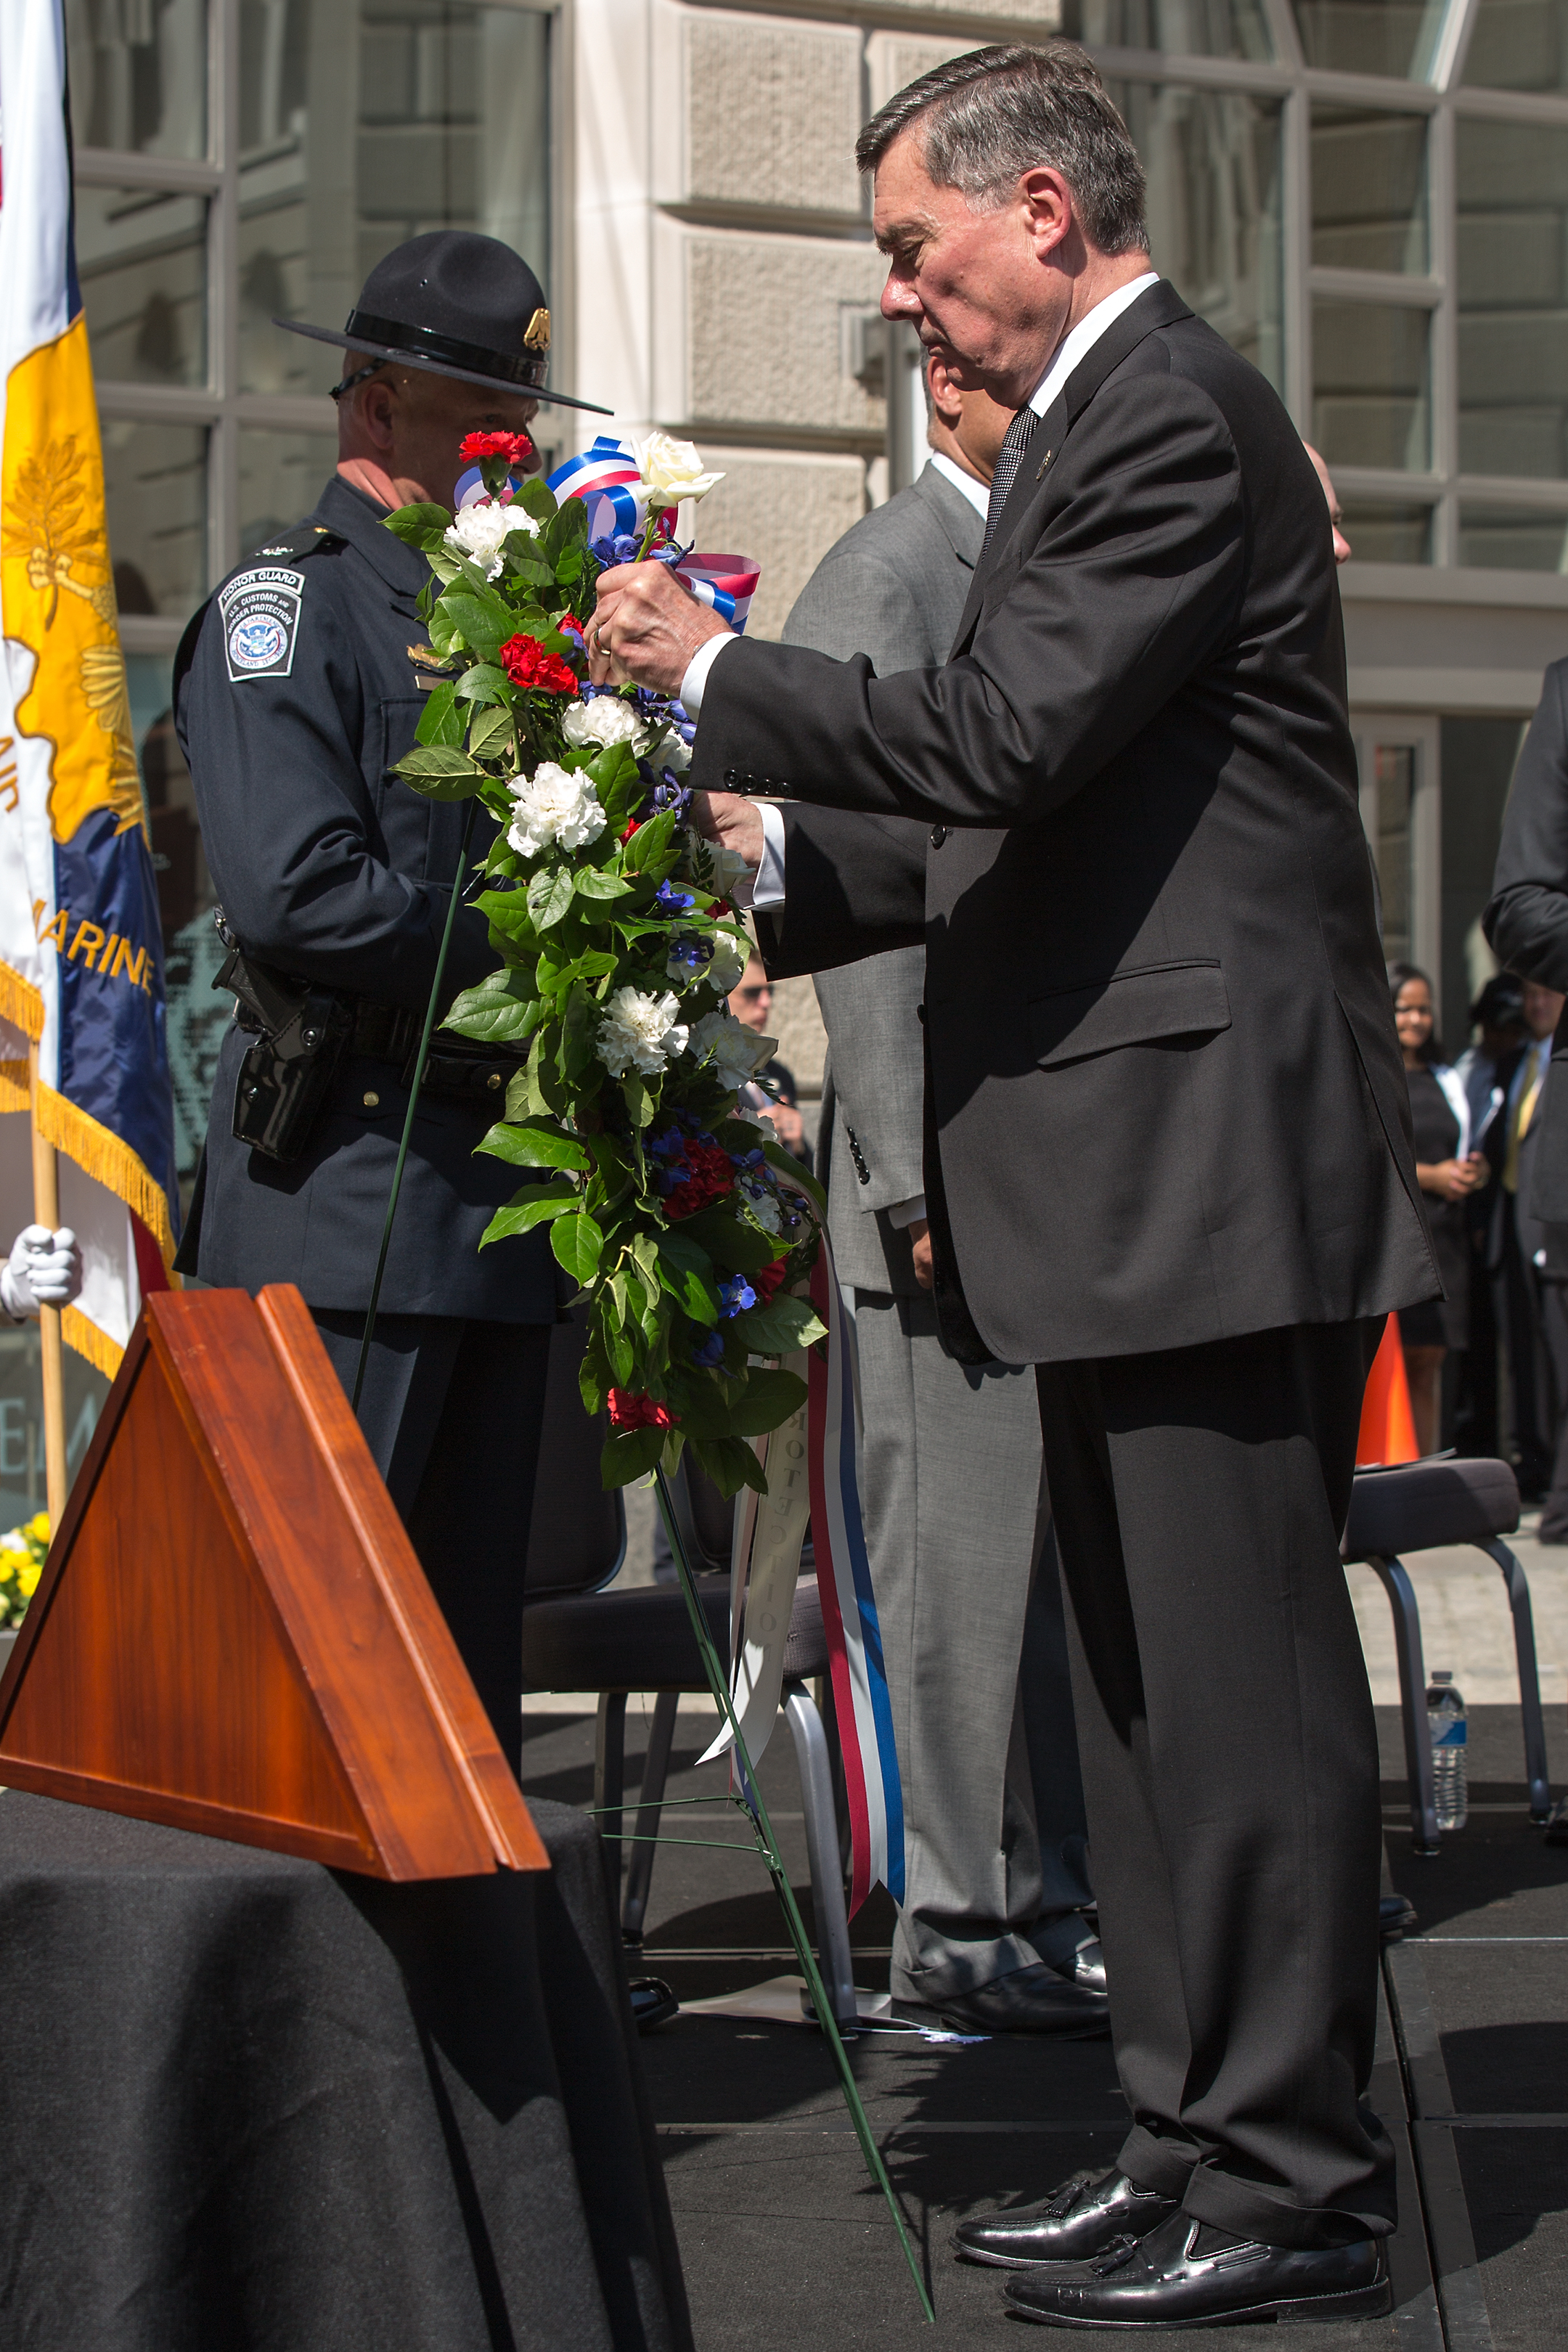 At the May 2014 CBP Valor Memorial ceremony, Commissioner Kerlikowske places a flower in a wreath to honor CBP’s fallen employees. CBP Acting Deputy Commissioner Kevin McAleenan stands at right.